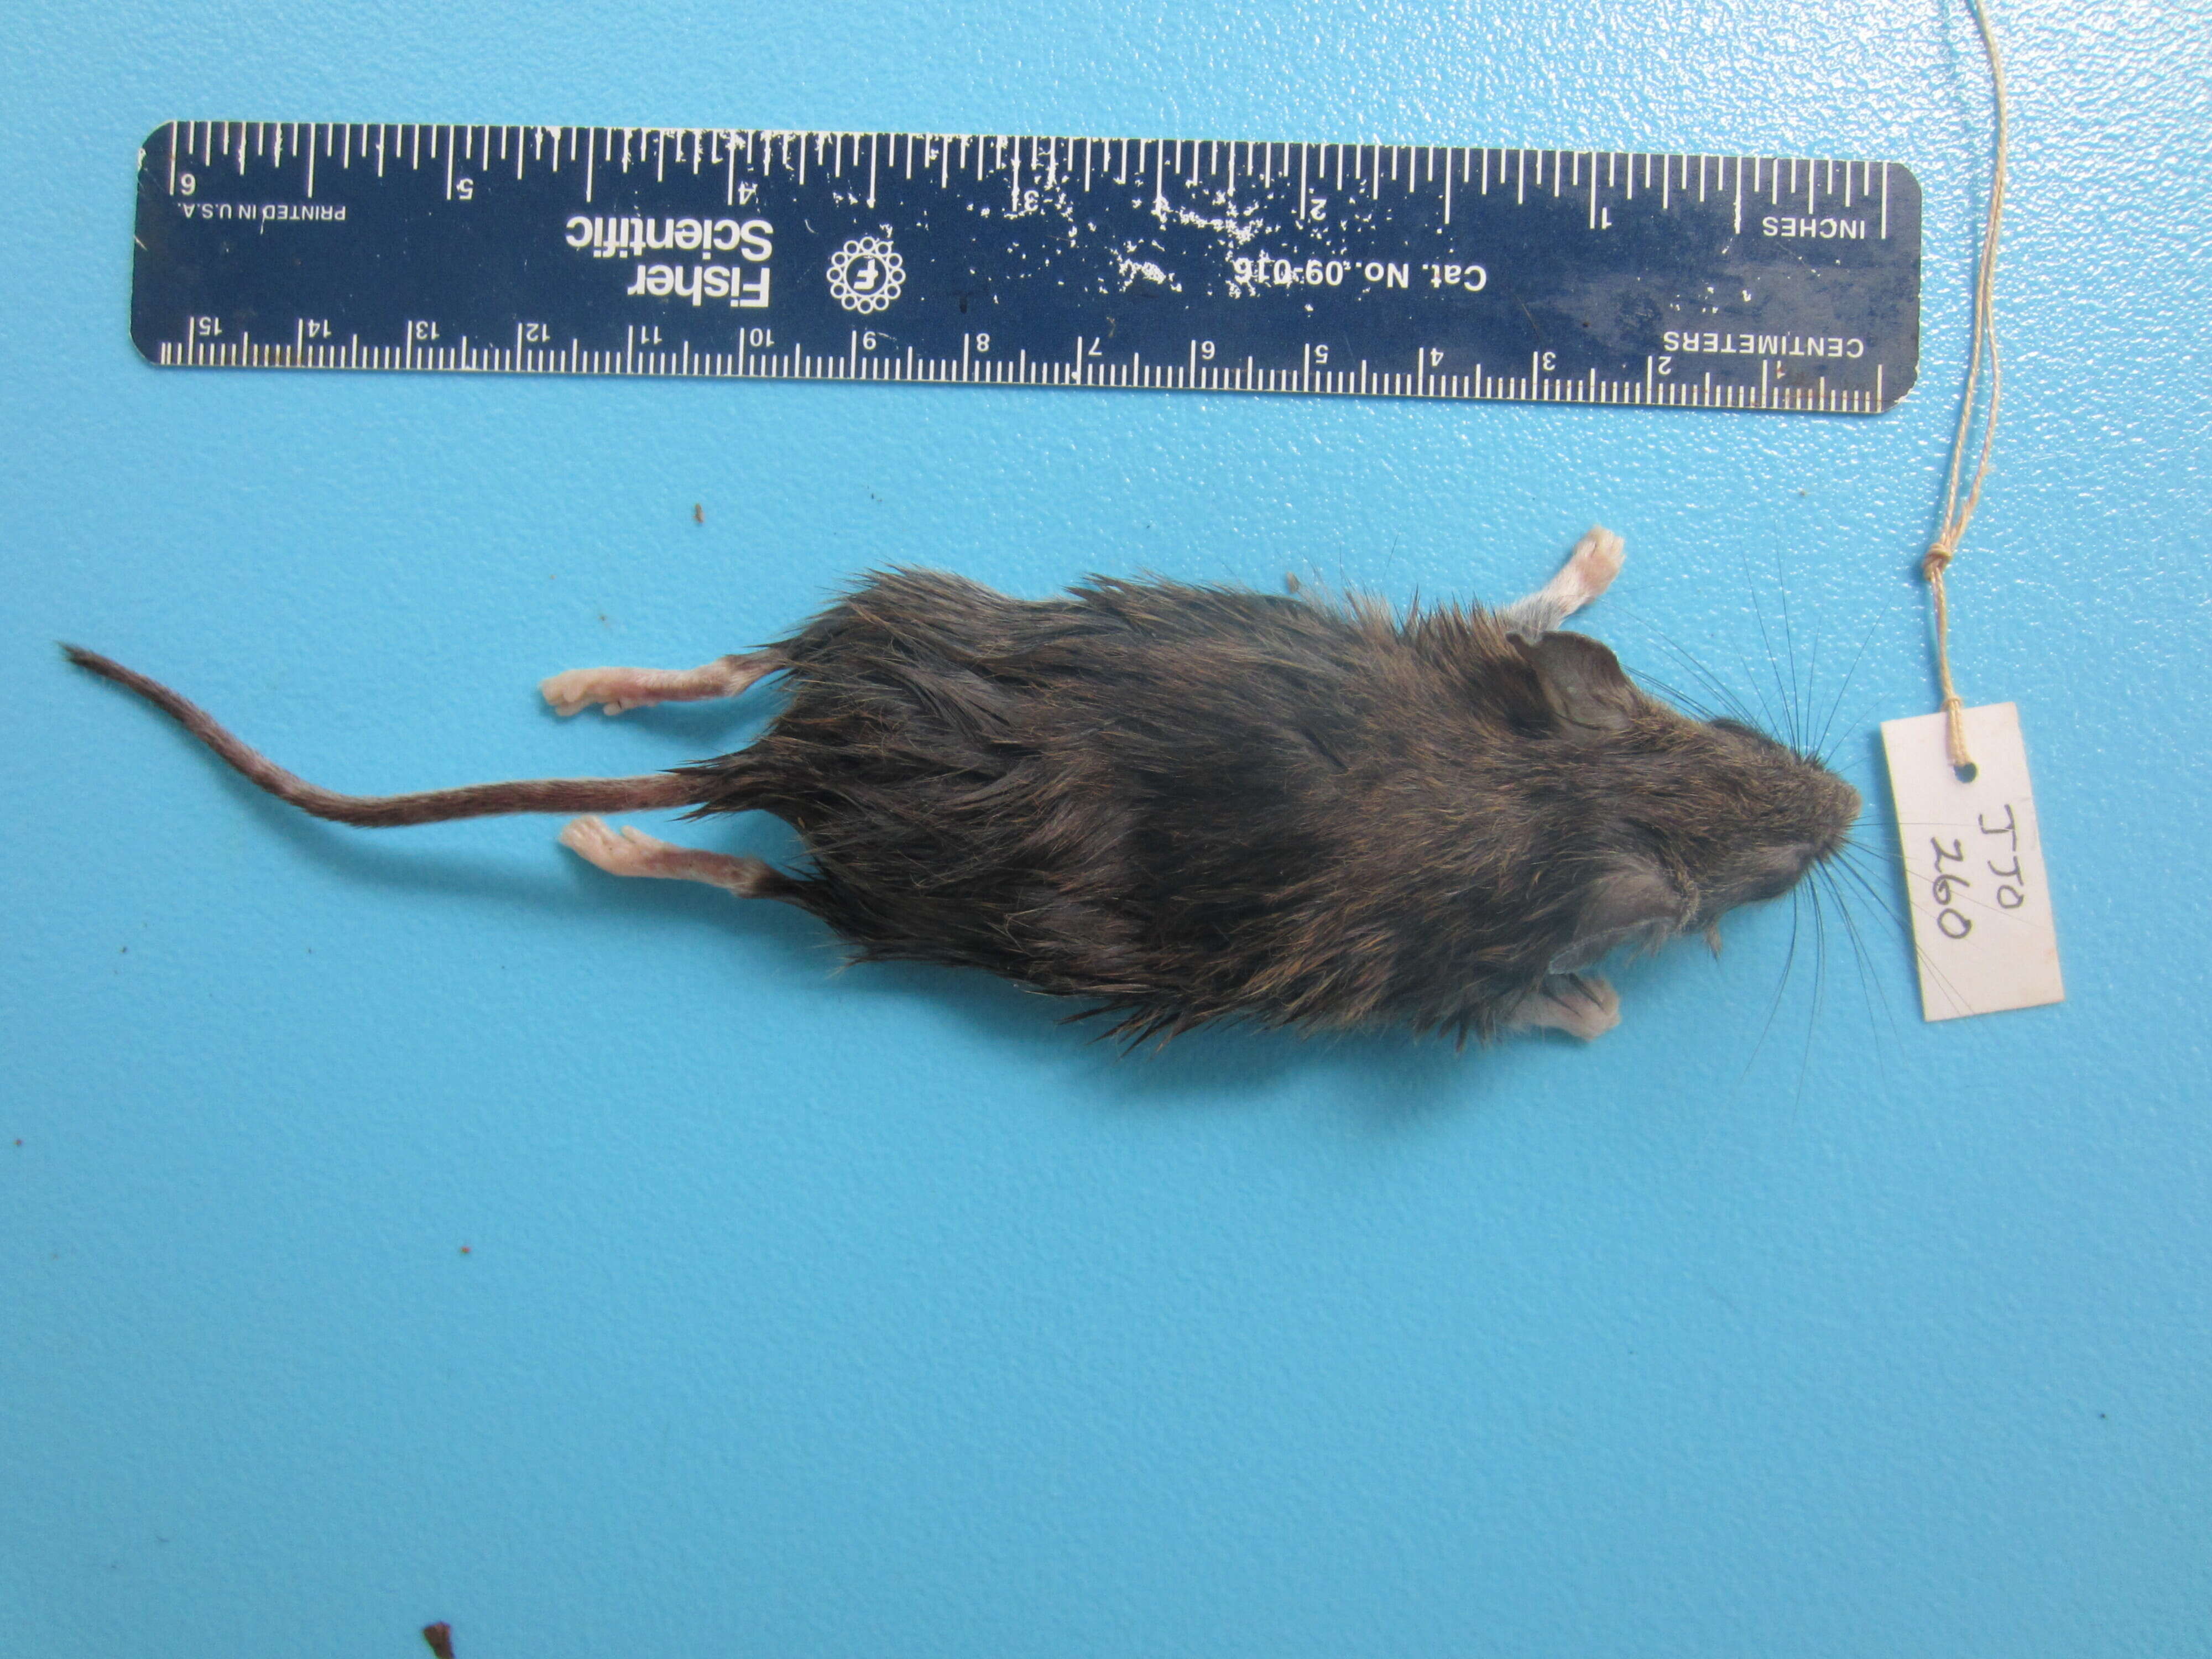 Image of White-footed Deermouse